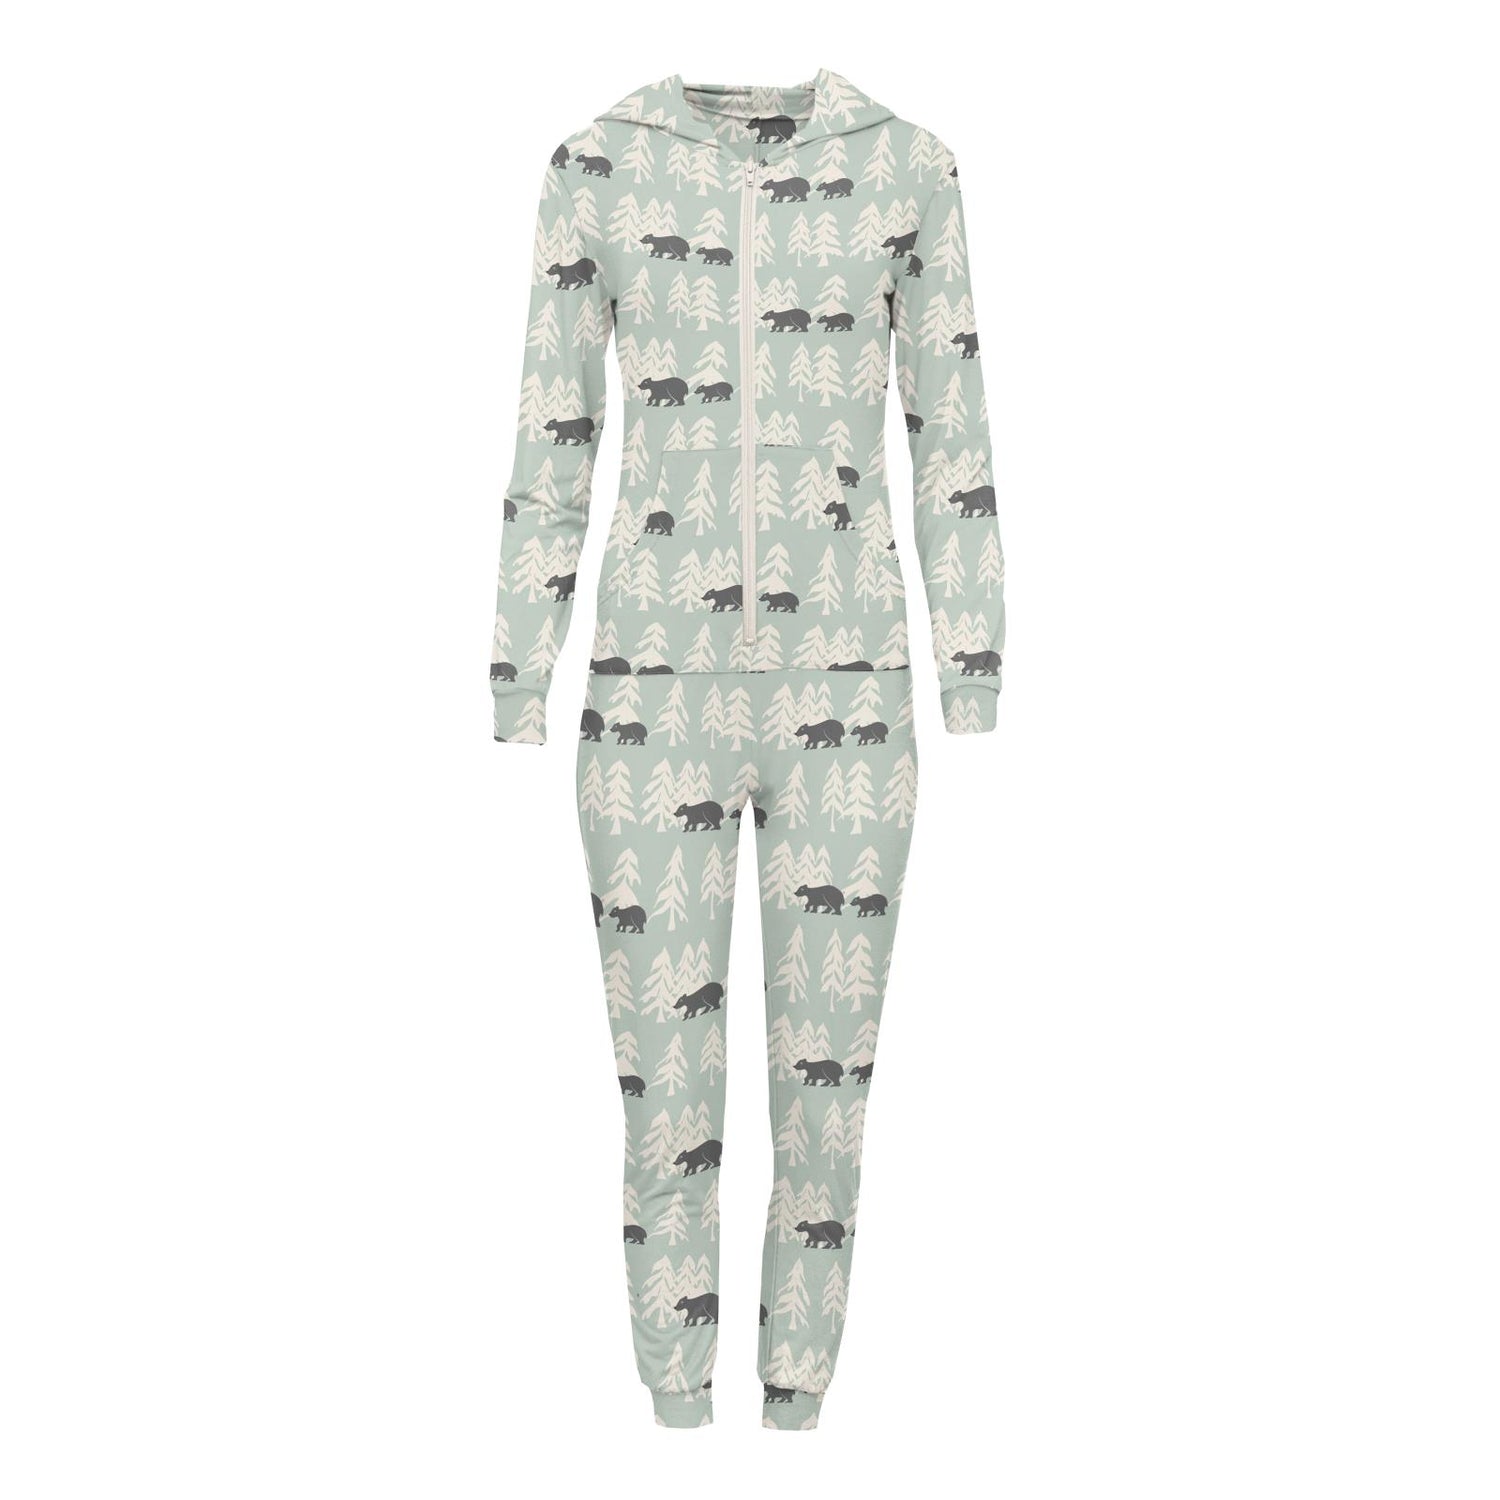 Women's Print Long Sleeve Jumpsuit with Hood in Aloe Bears and Trees